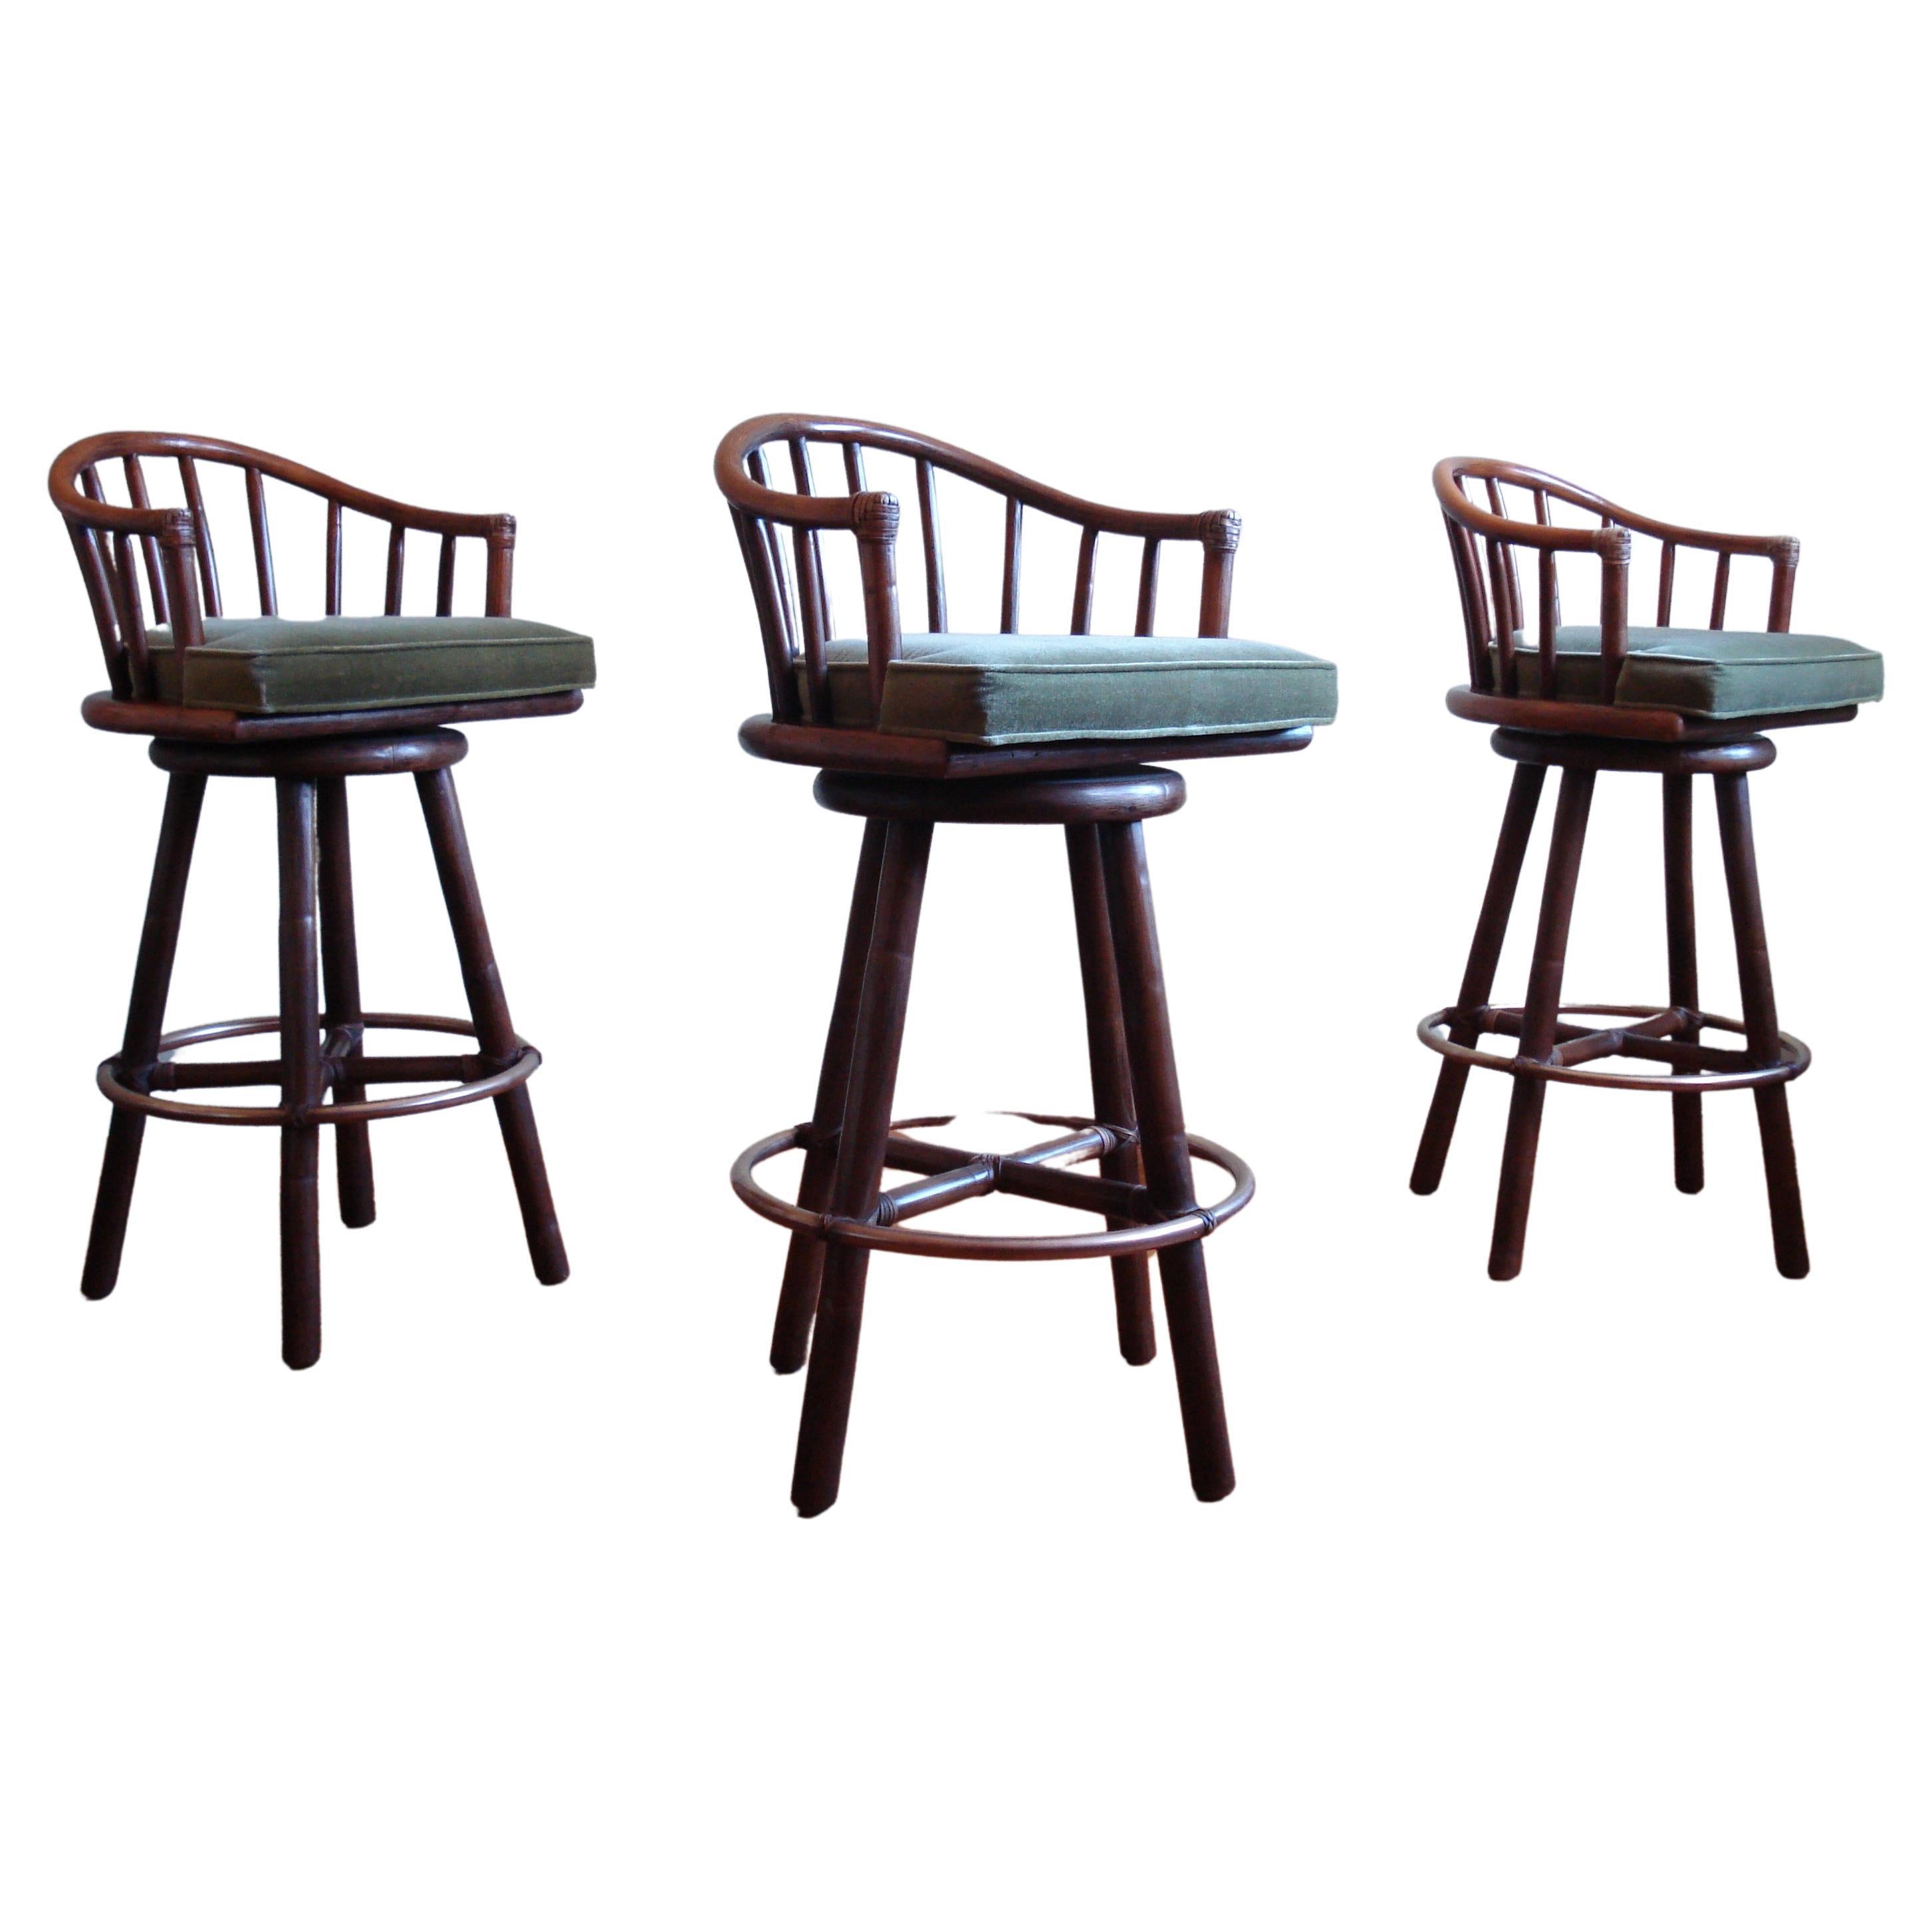 Vintage Rattan Barstool by McGuire, Set of 3 For Sale